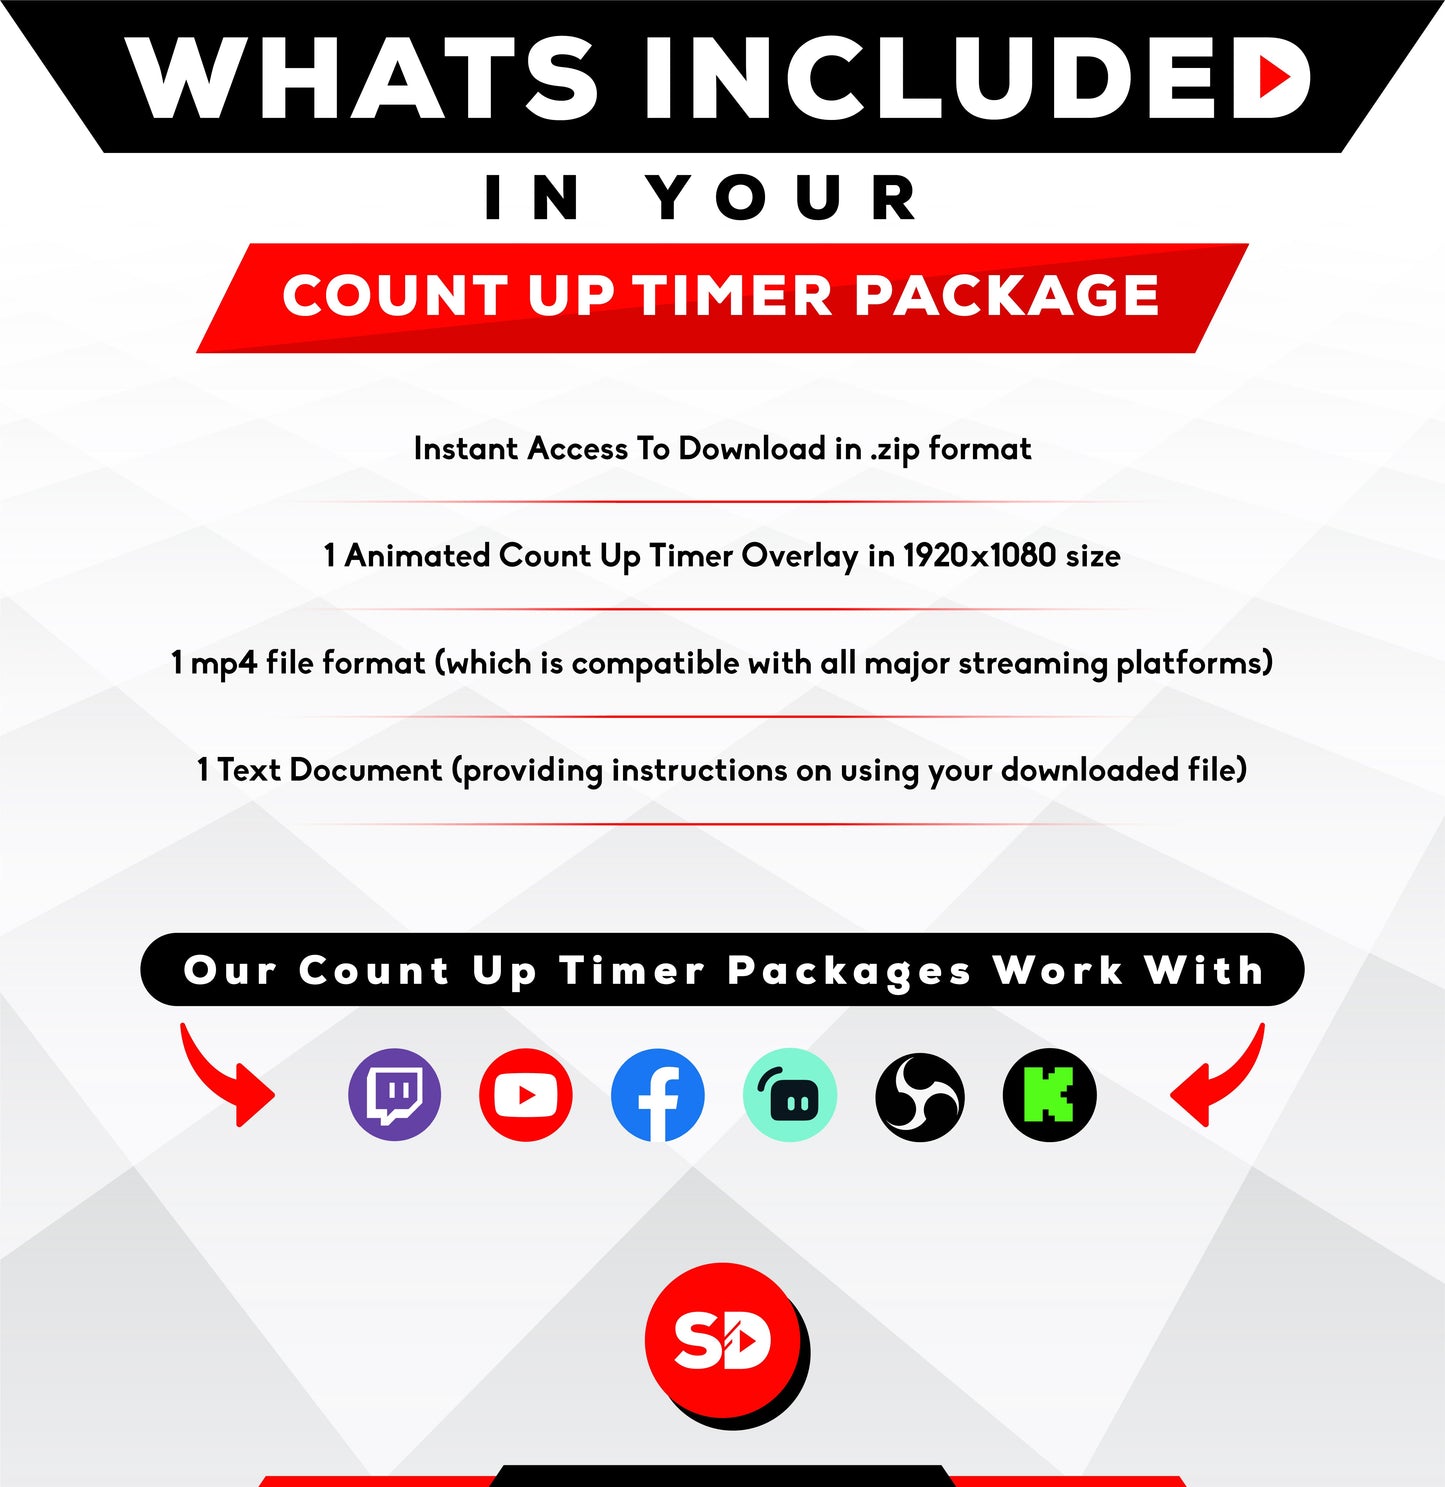 whats included in your package - 5 minute count up timer thumbnail - battleground - stream designz